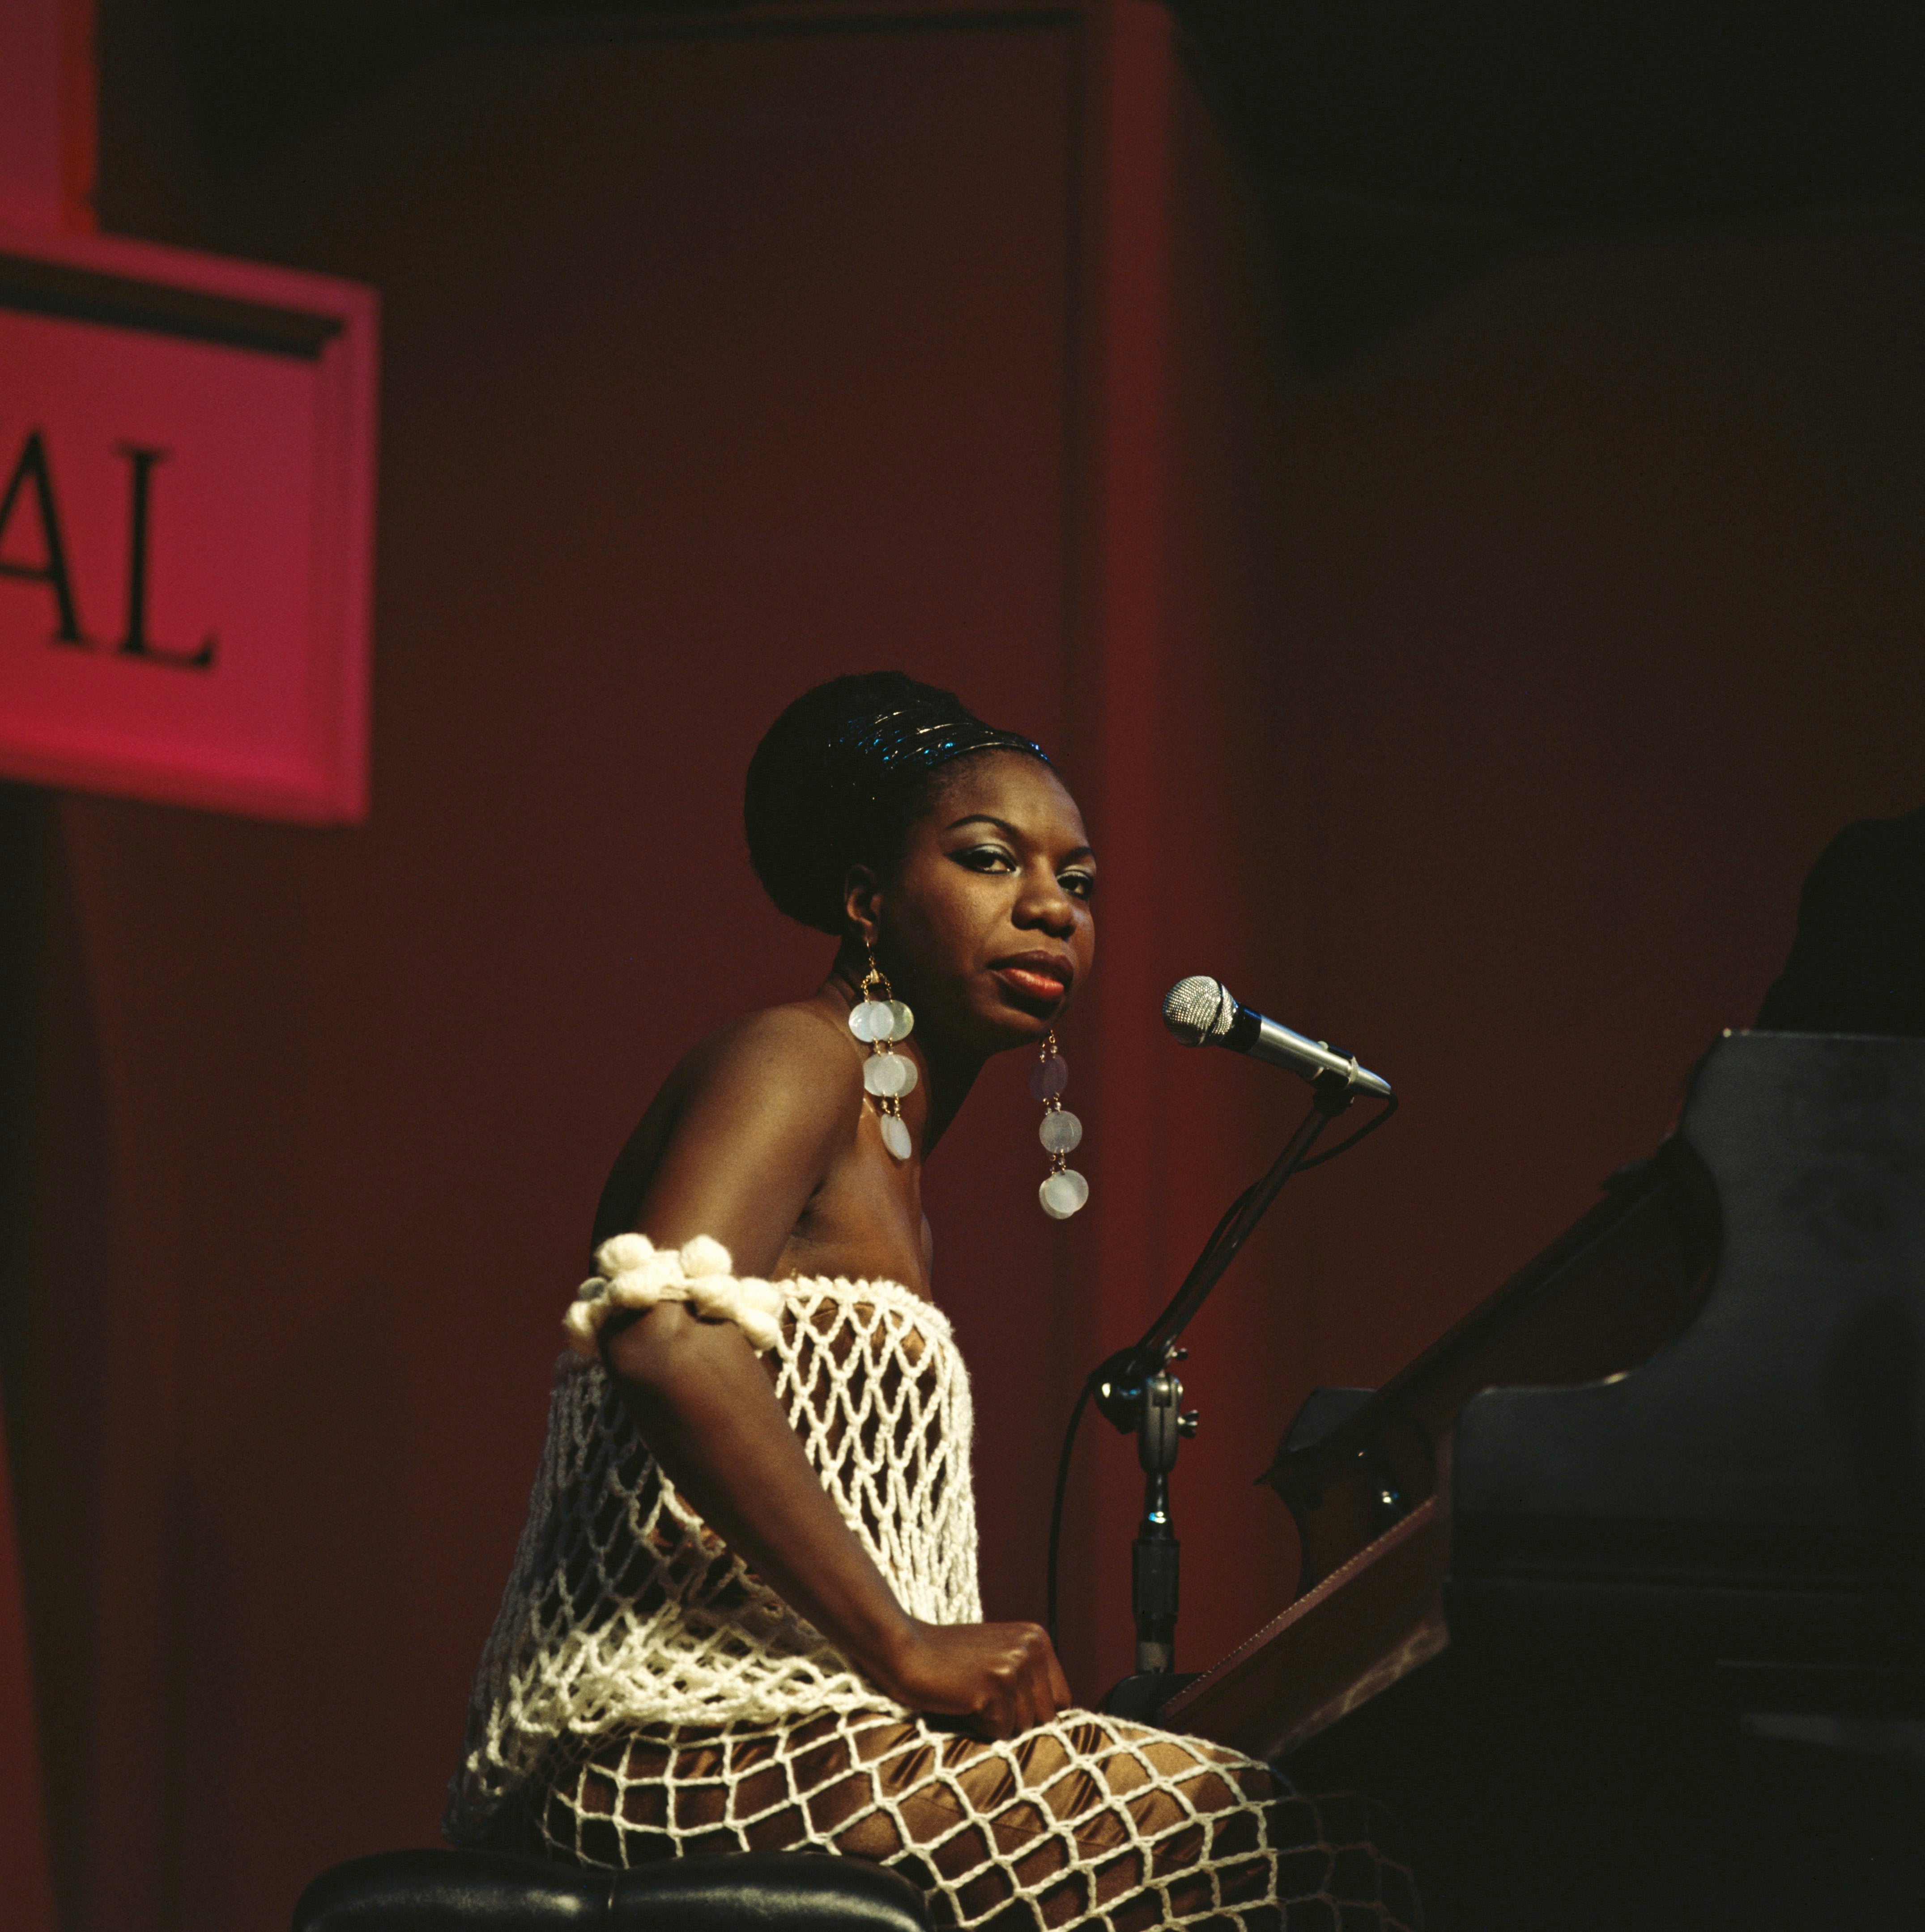 ICYMI: Nina Simone Nominated For Rock And Roll Hall of Fame And JAY-Z's Puerto Rico Relief
